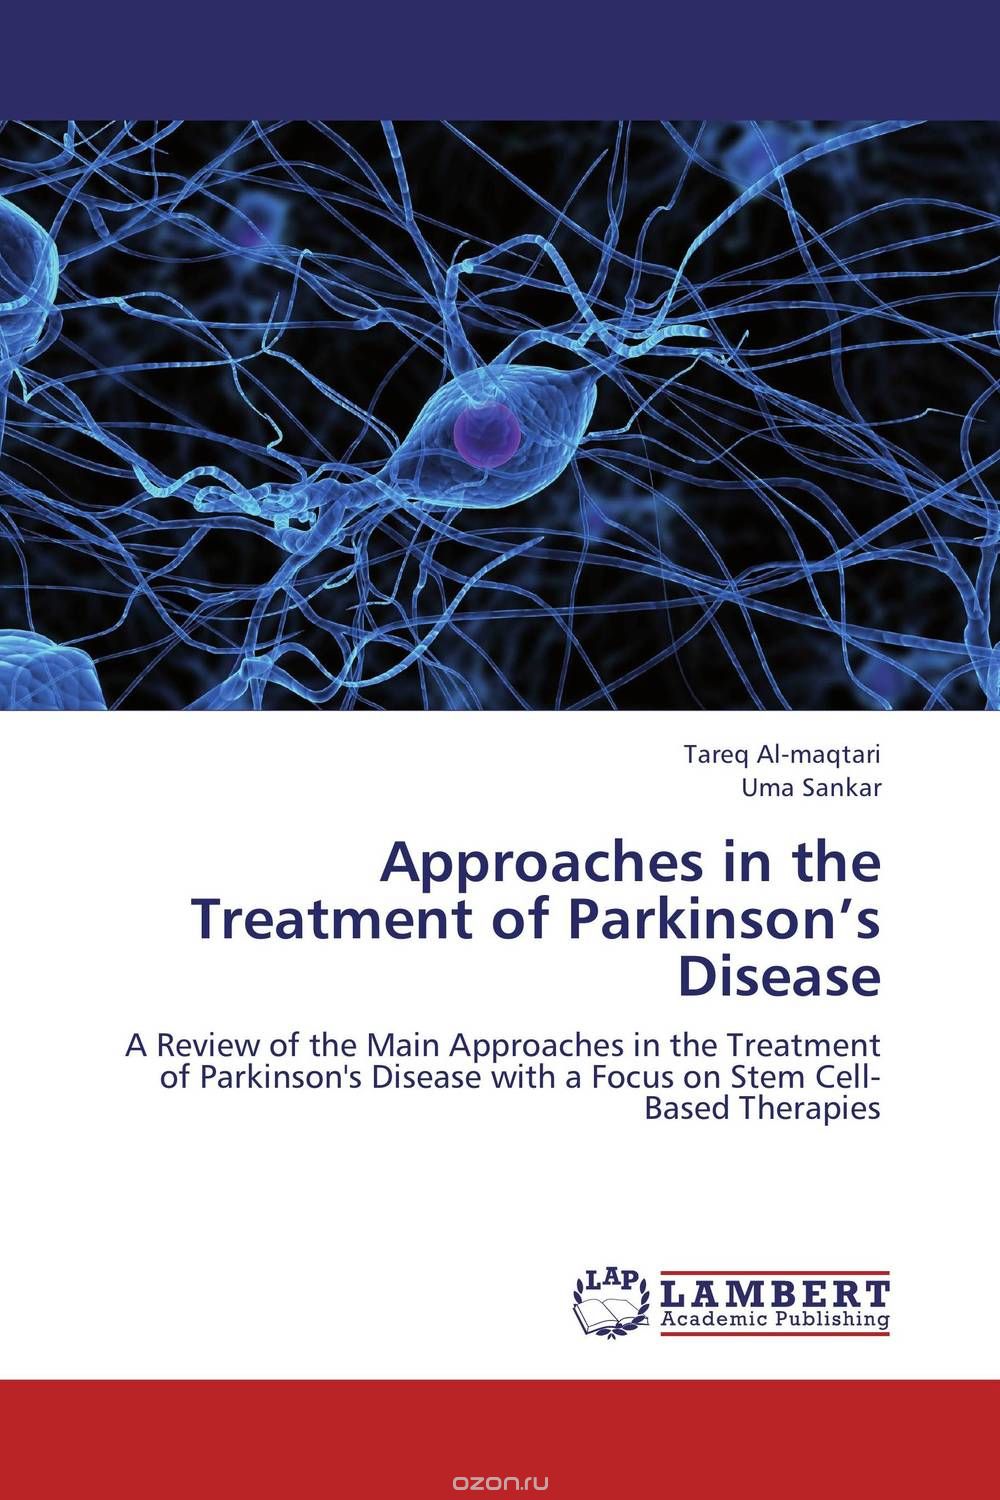 Скачать книгу "Approaches in the Treatment of Parkinson’s Disease"